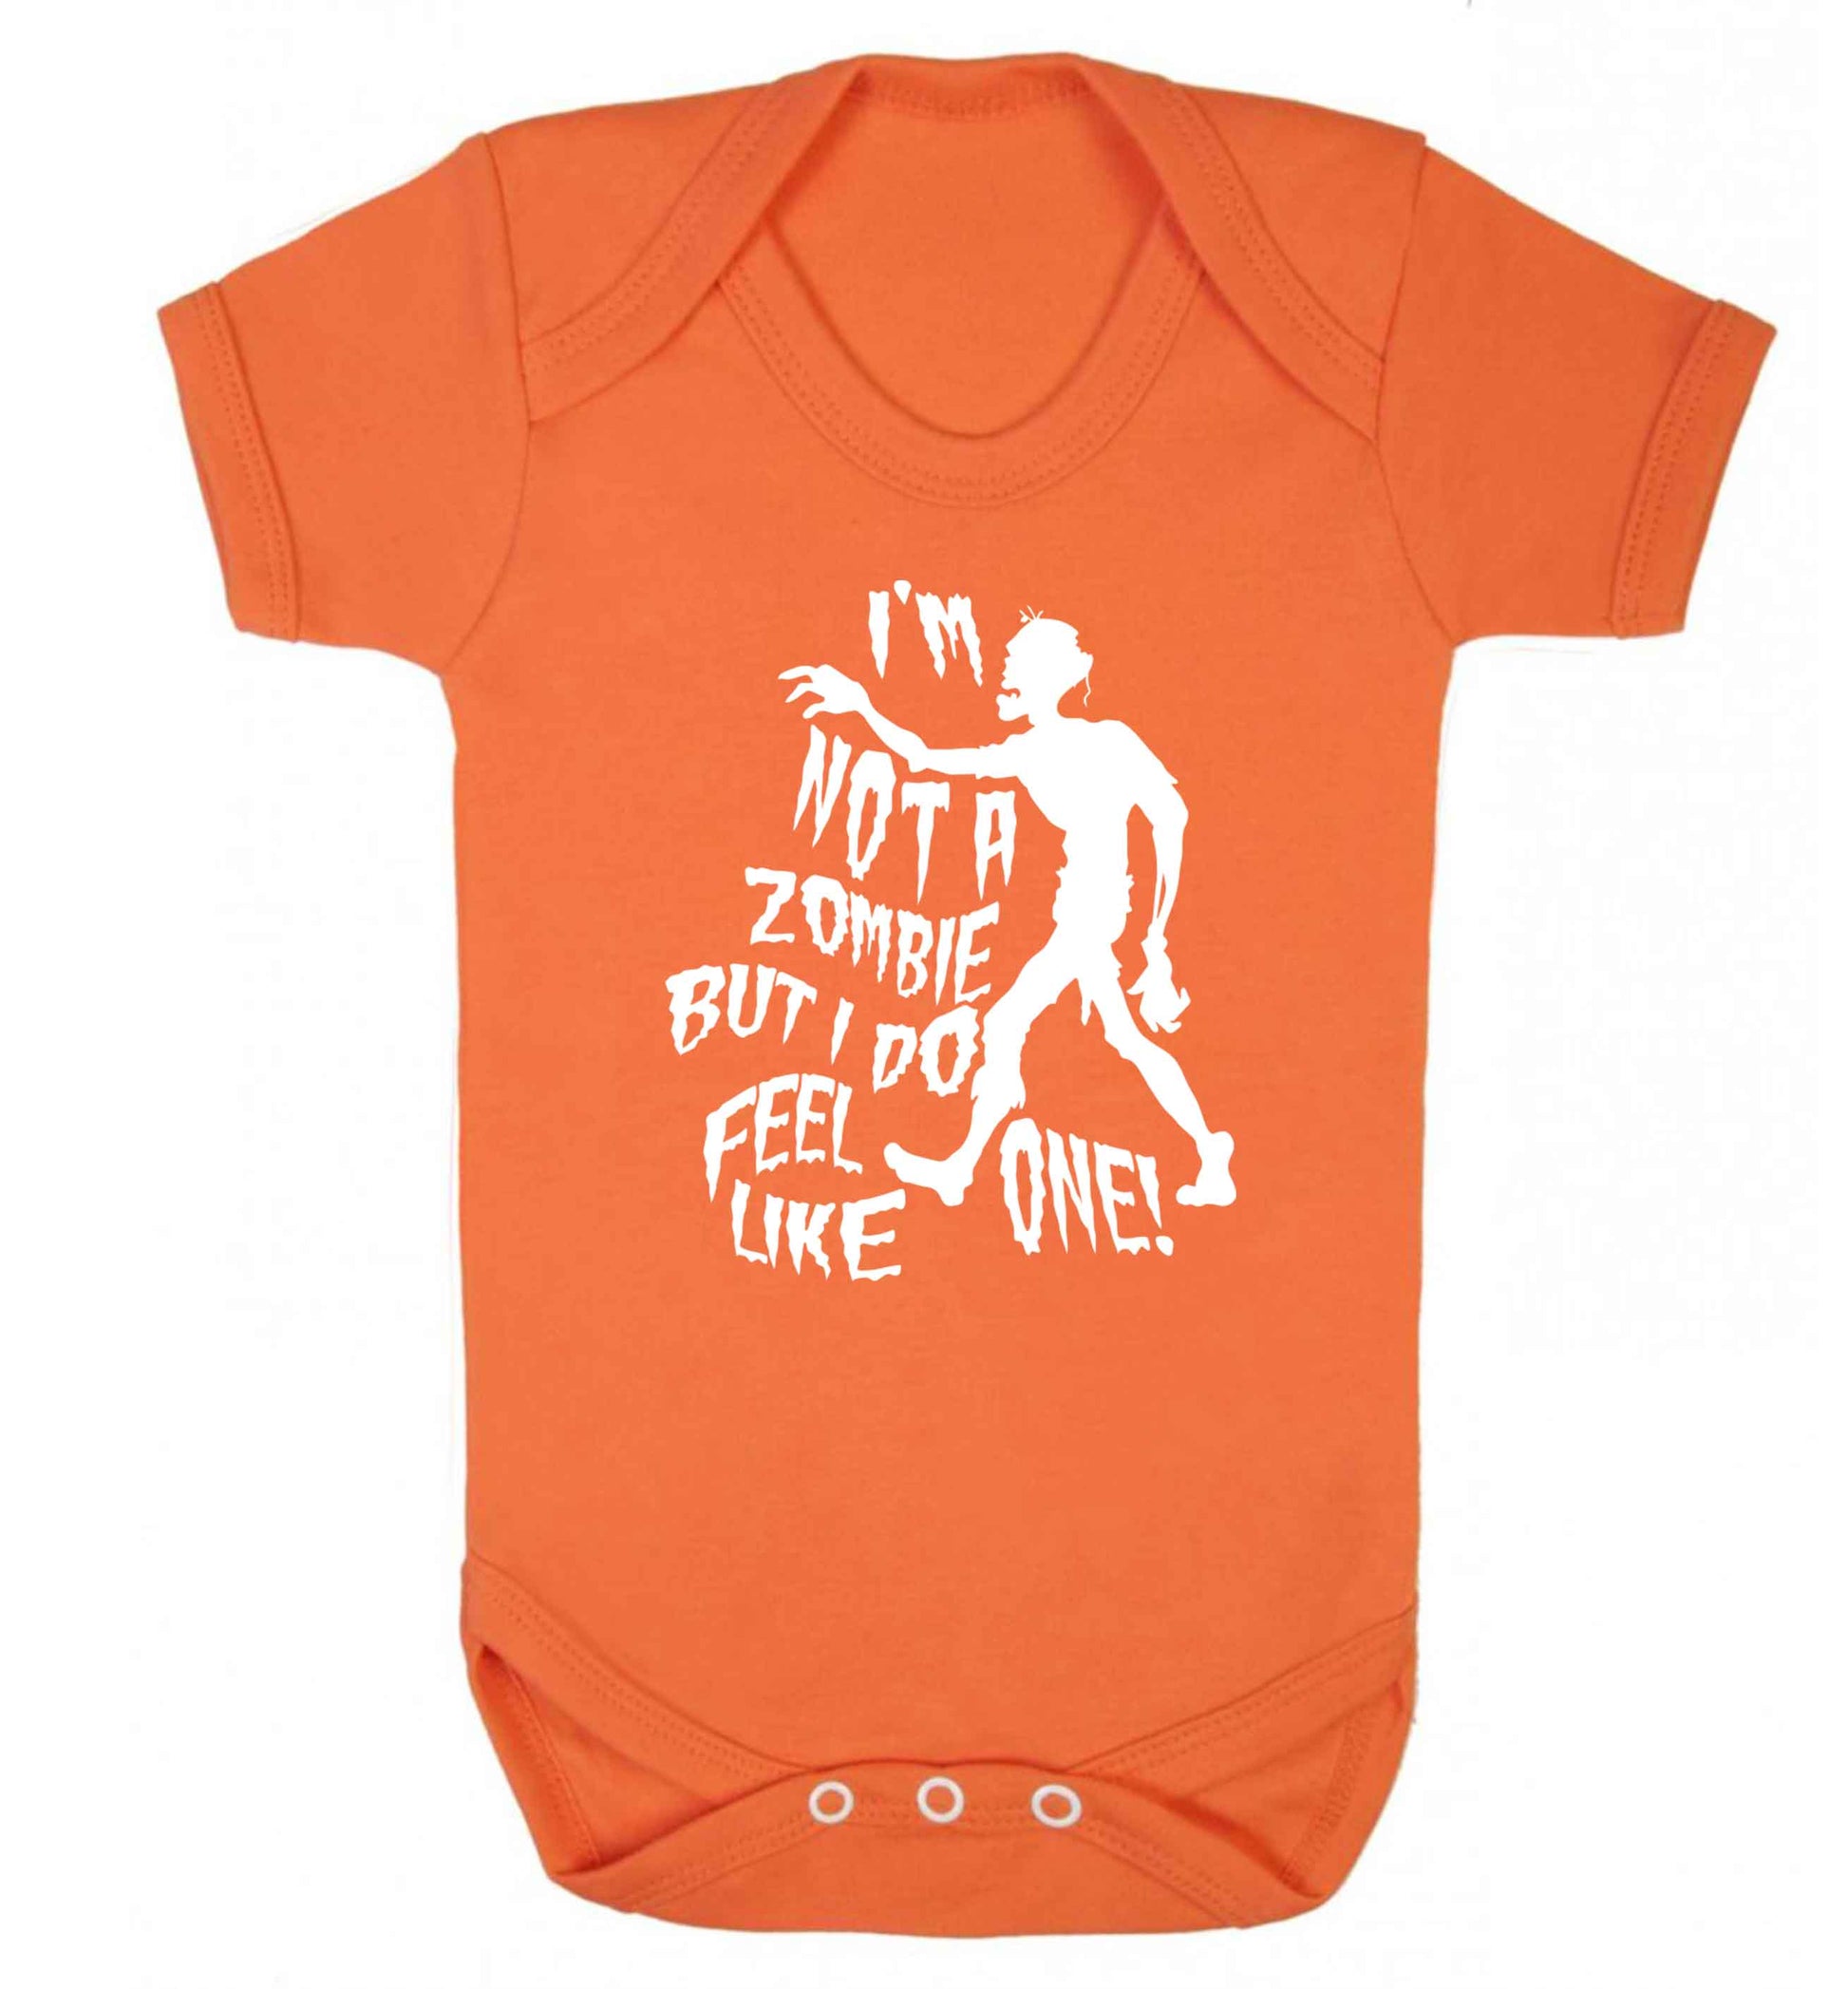 I'm not a zombie but I do feel like one! Baby Vest orange 18-24 months